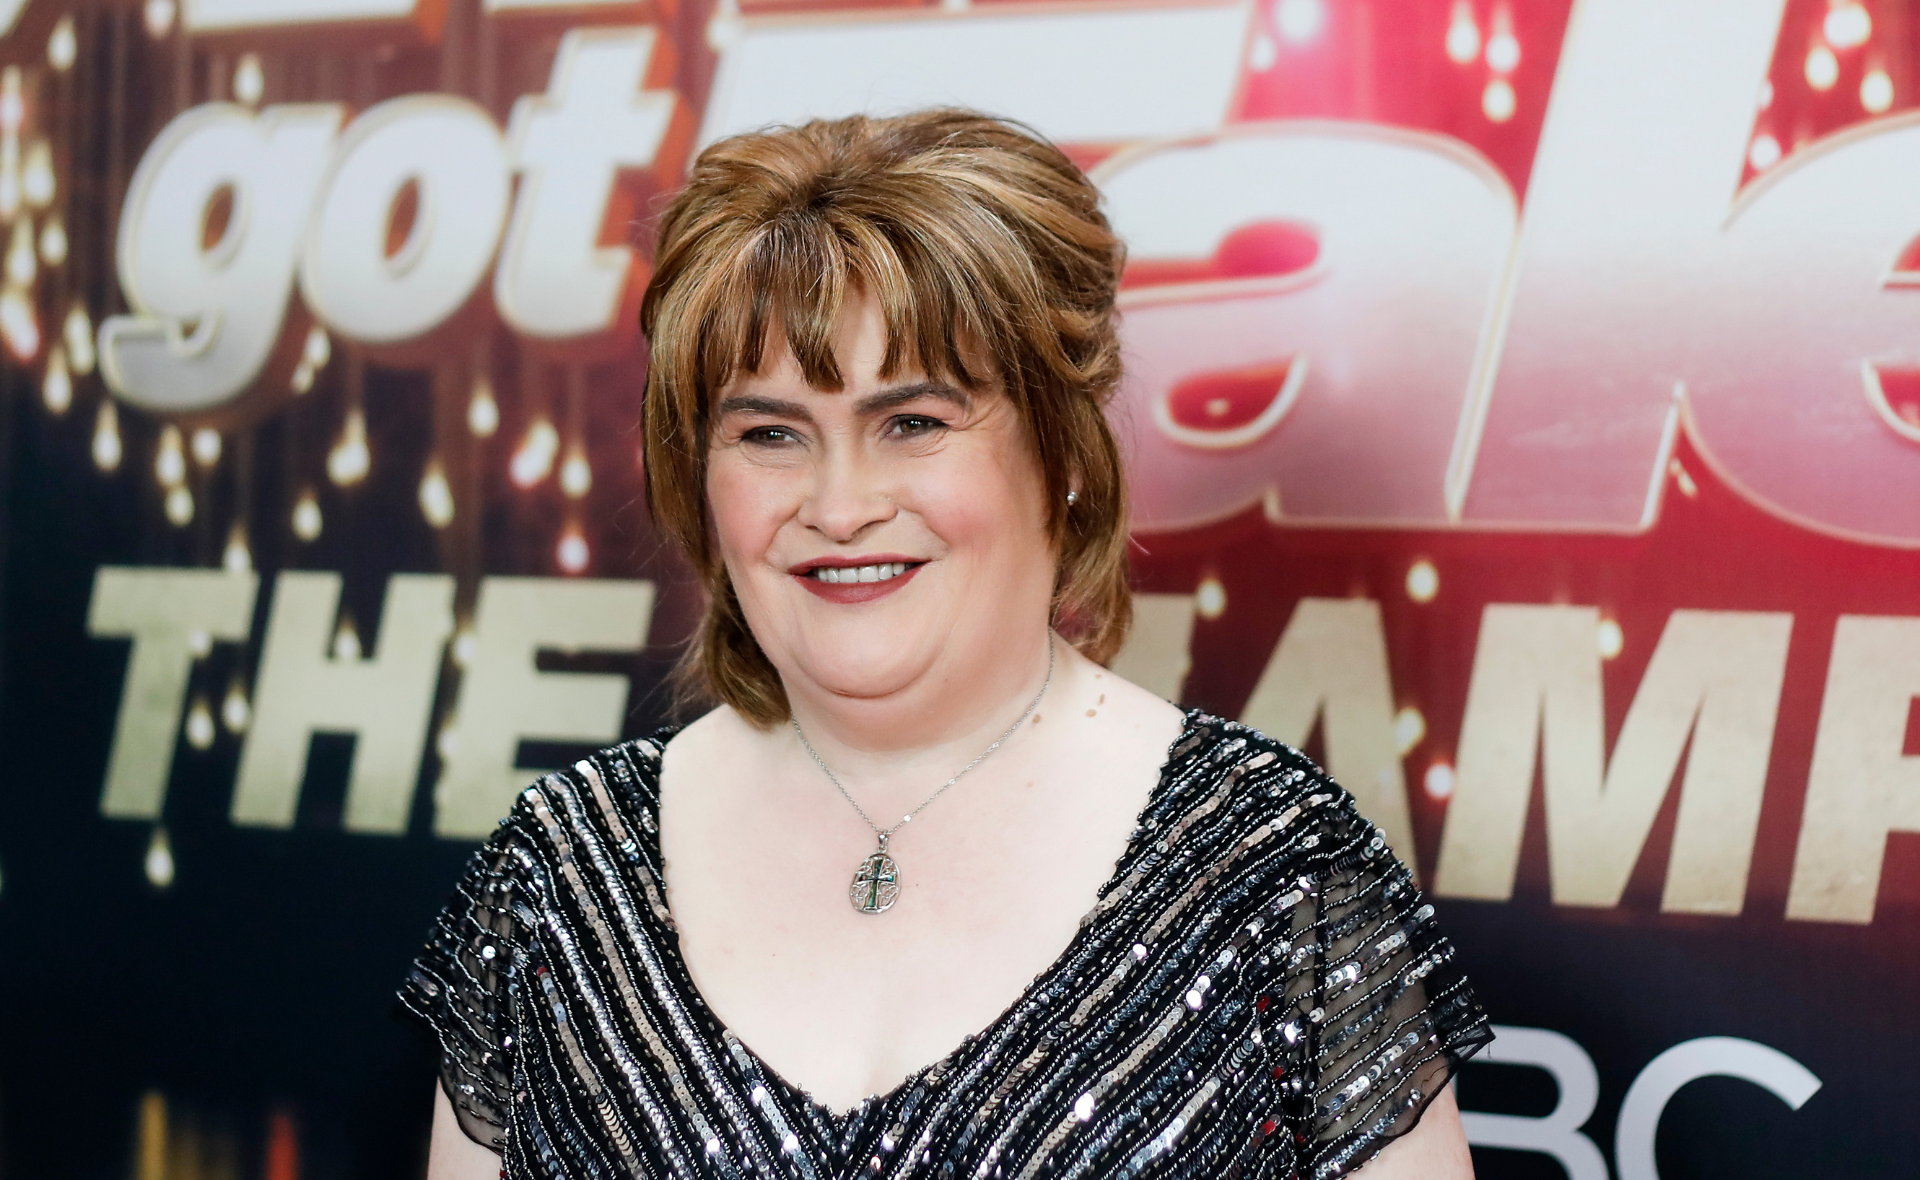 Susan Boyle has returned to the Britain’s Got Talent after suffering a minor stroke